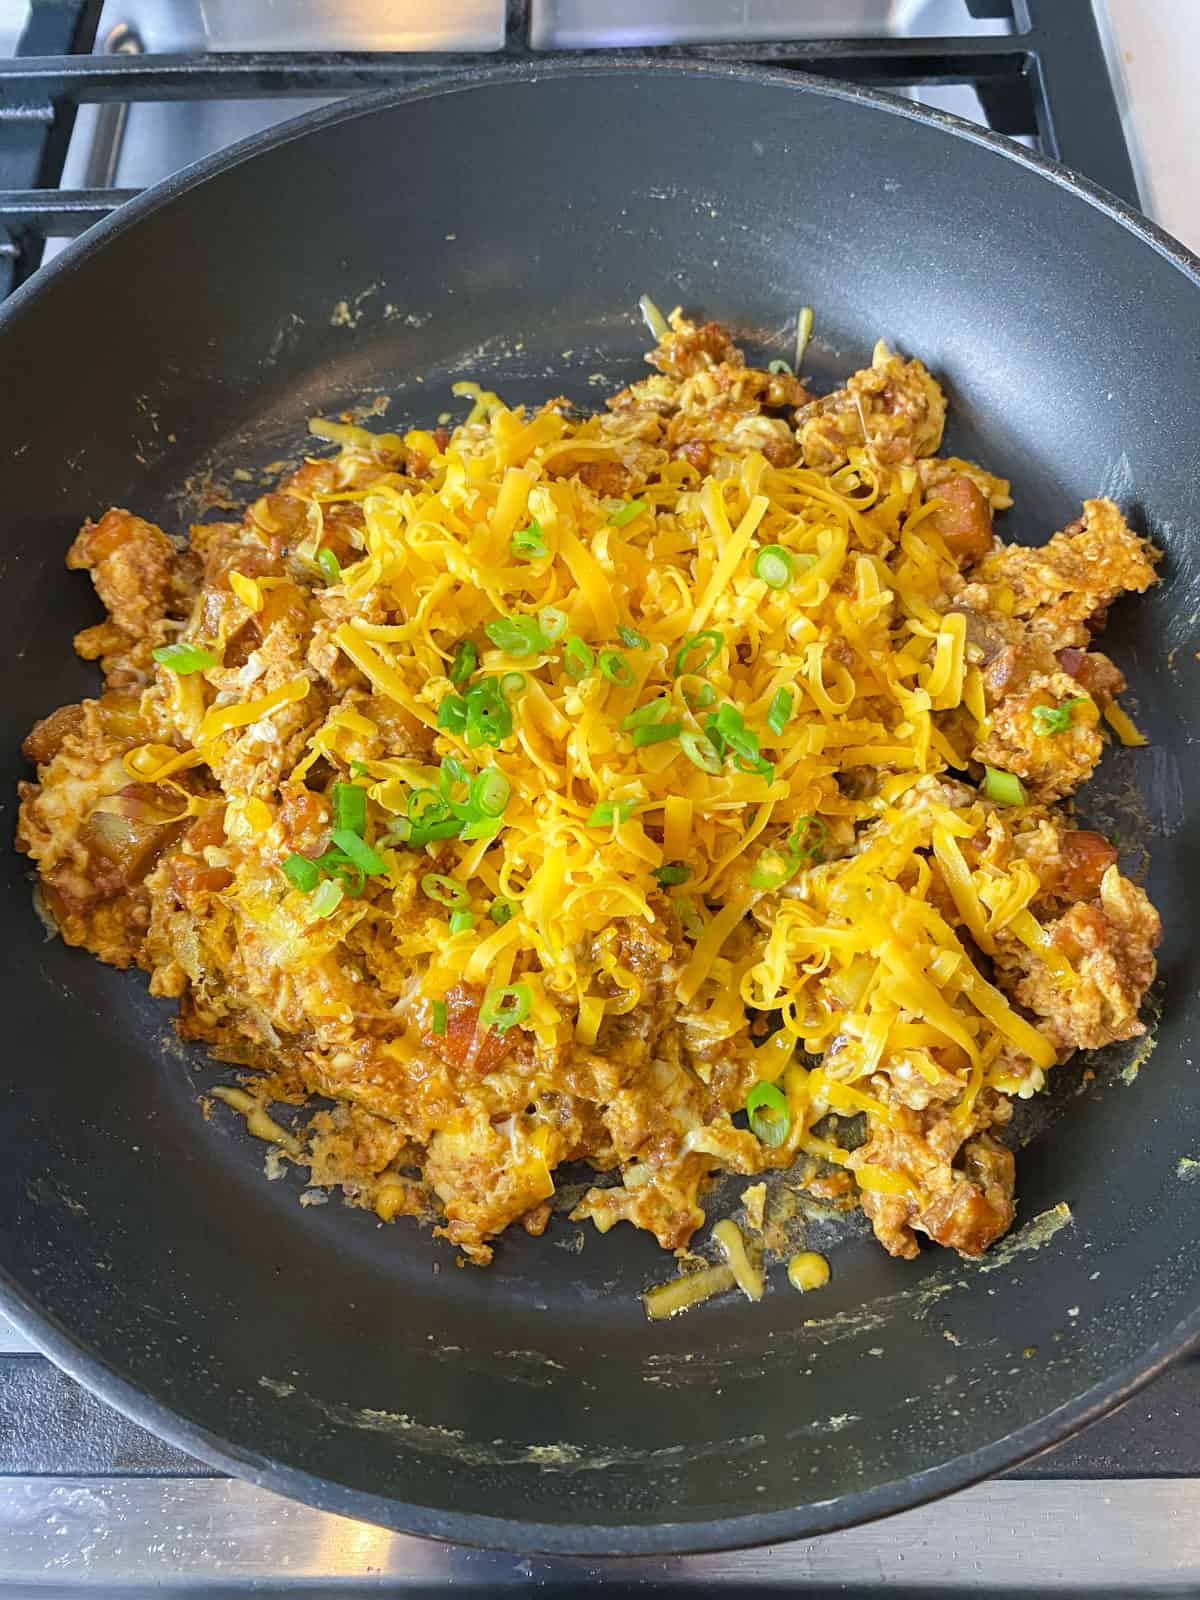 Add shredded cheddar cheese and green onions to the chorizo and egg scramble.